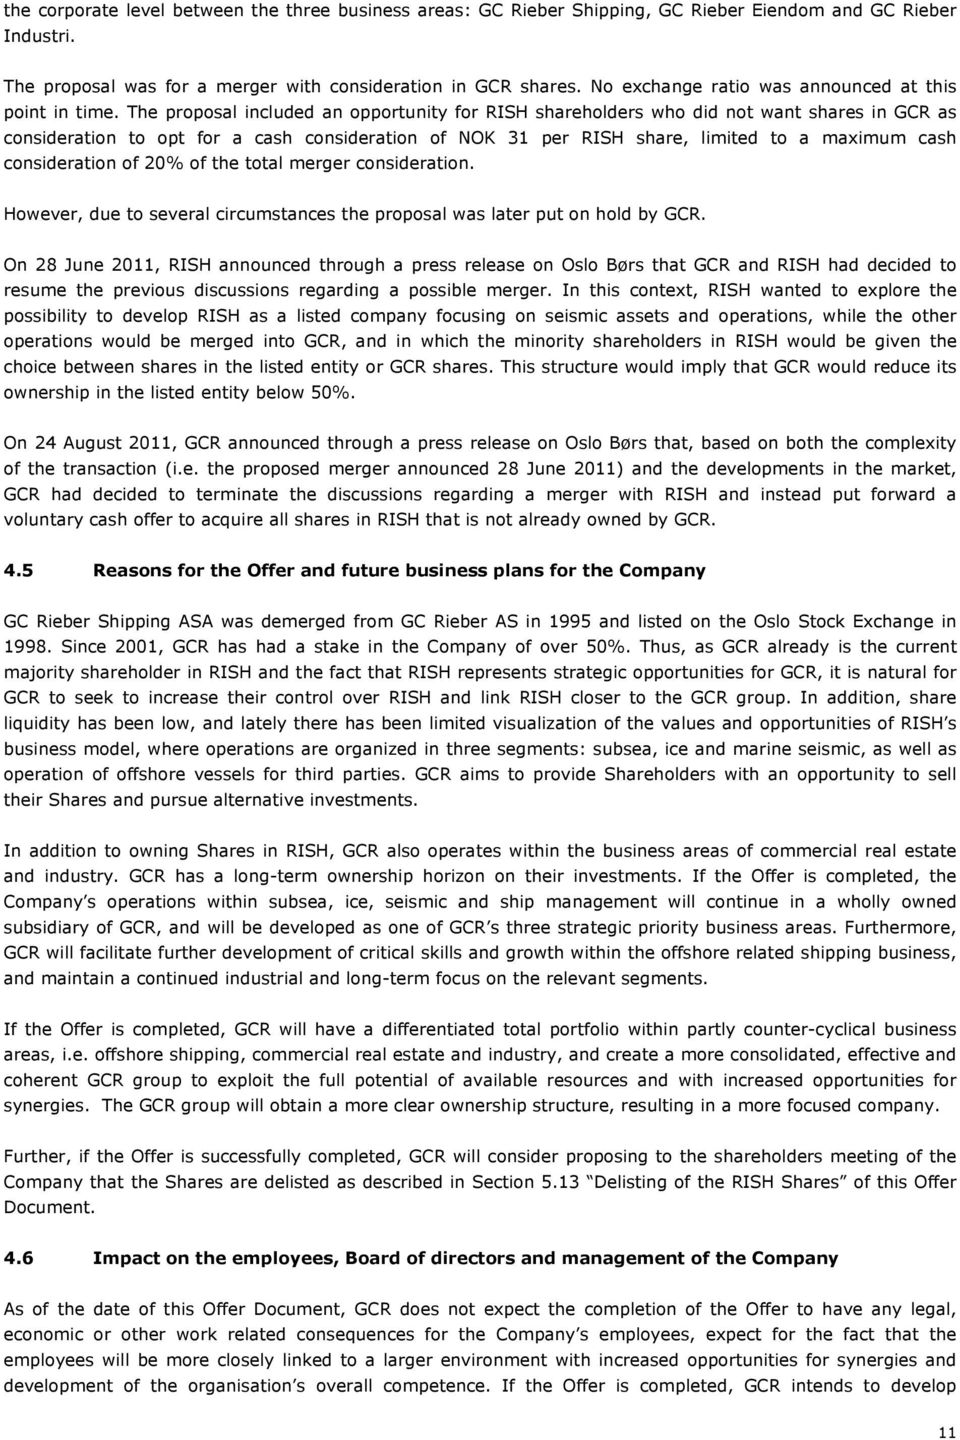 The proposal included an opportunity for RISH shareholders who did not want shares in GCR as consideration to opt for a cash consideration of NOK 31 per RISH share, limited to a maximum cash